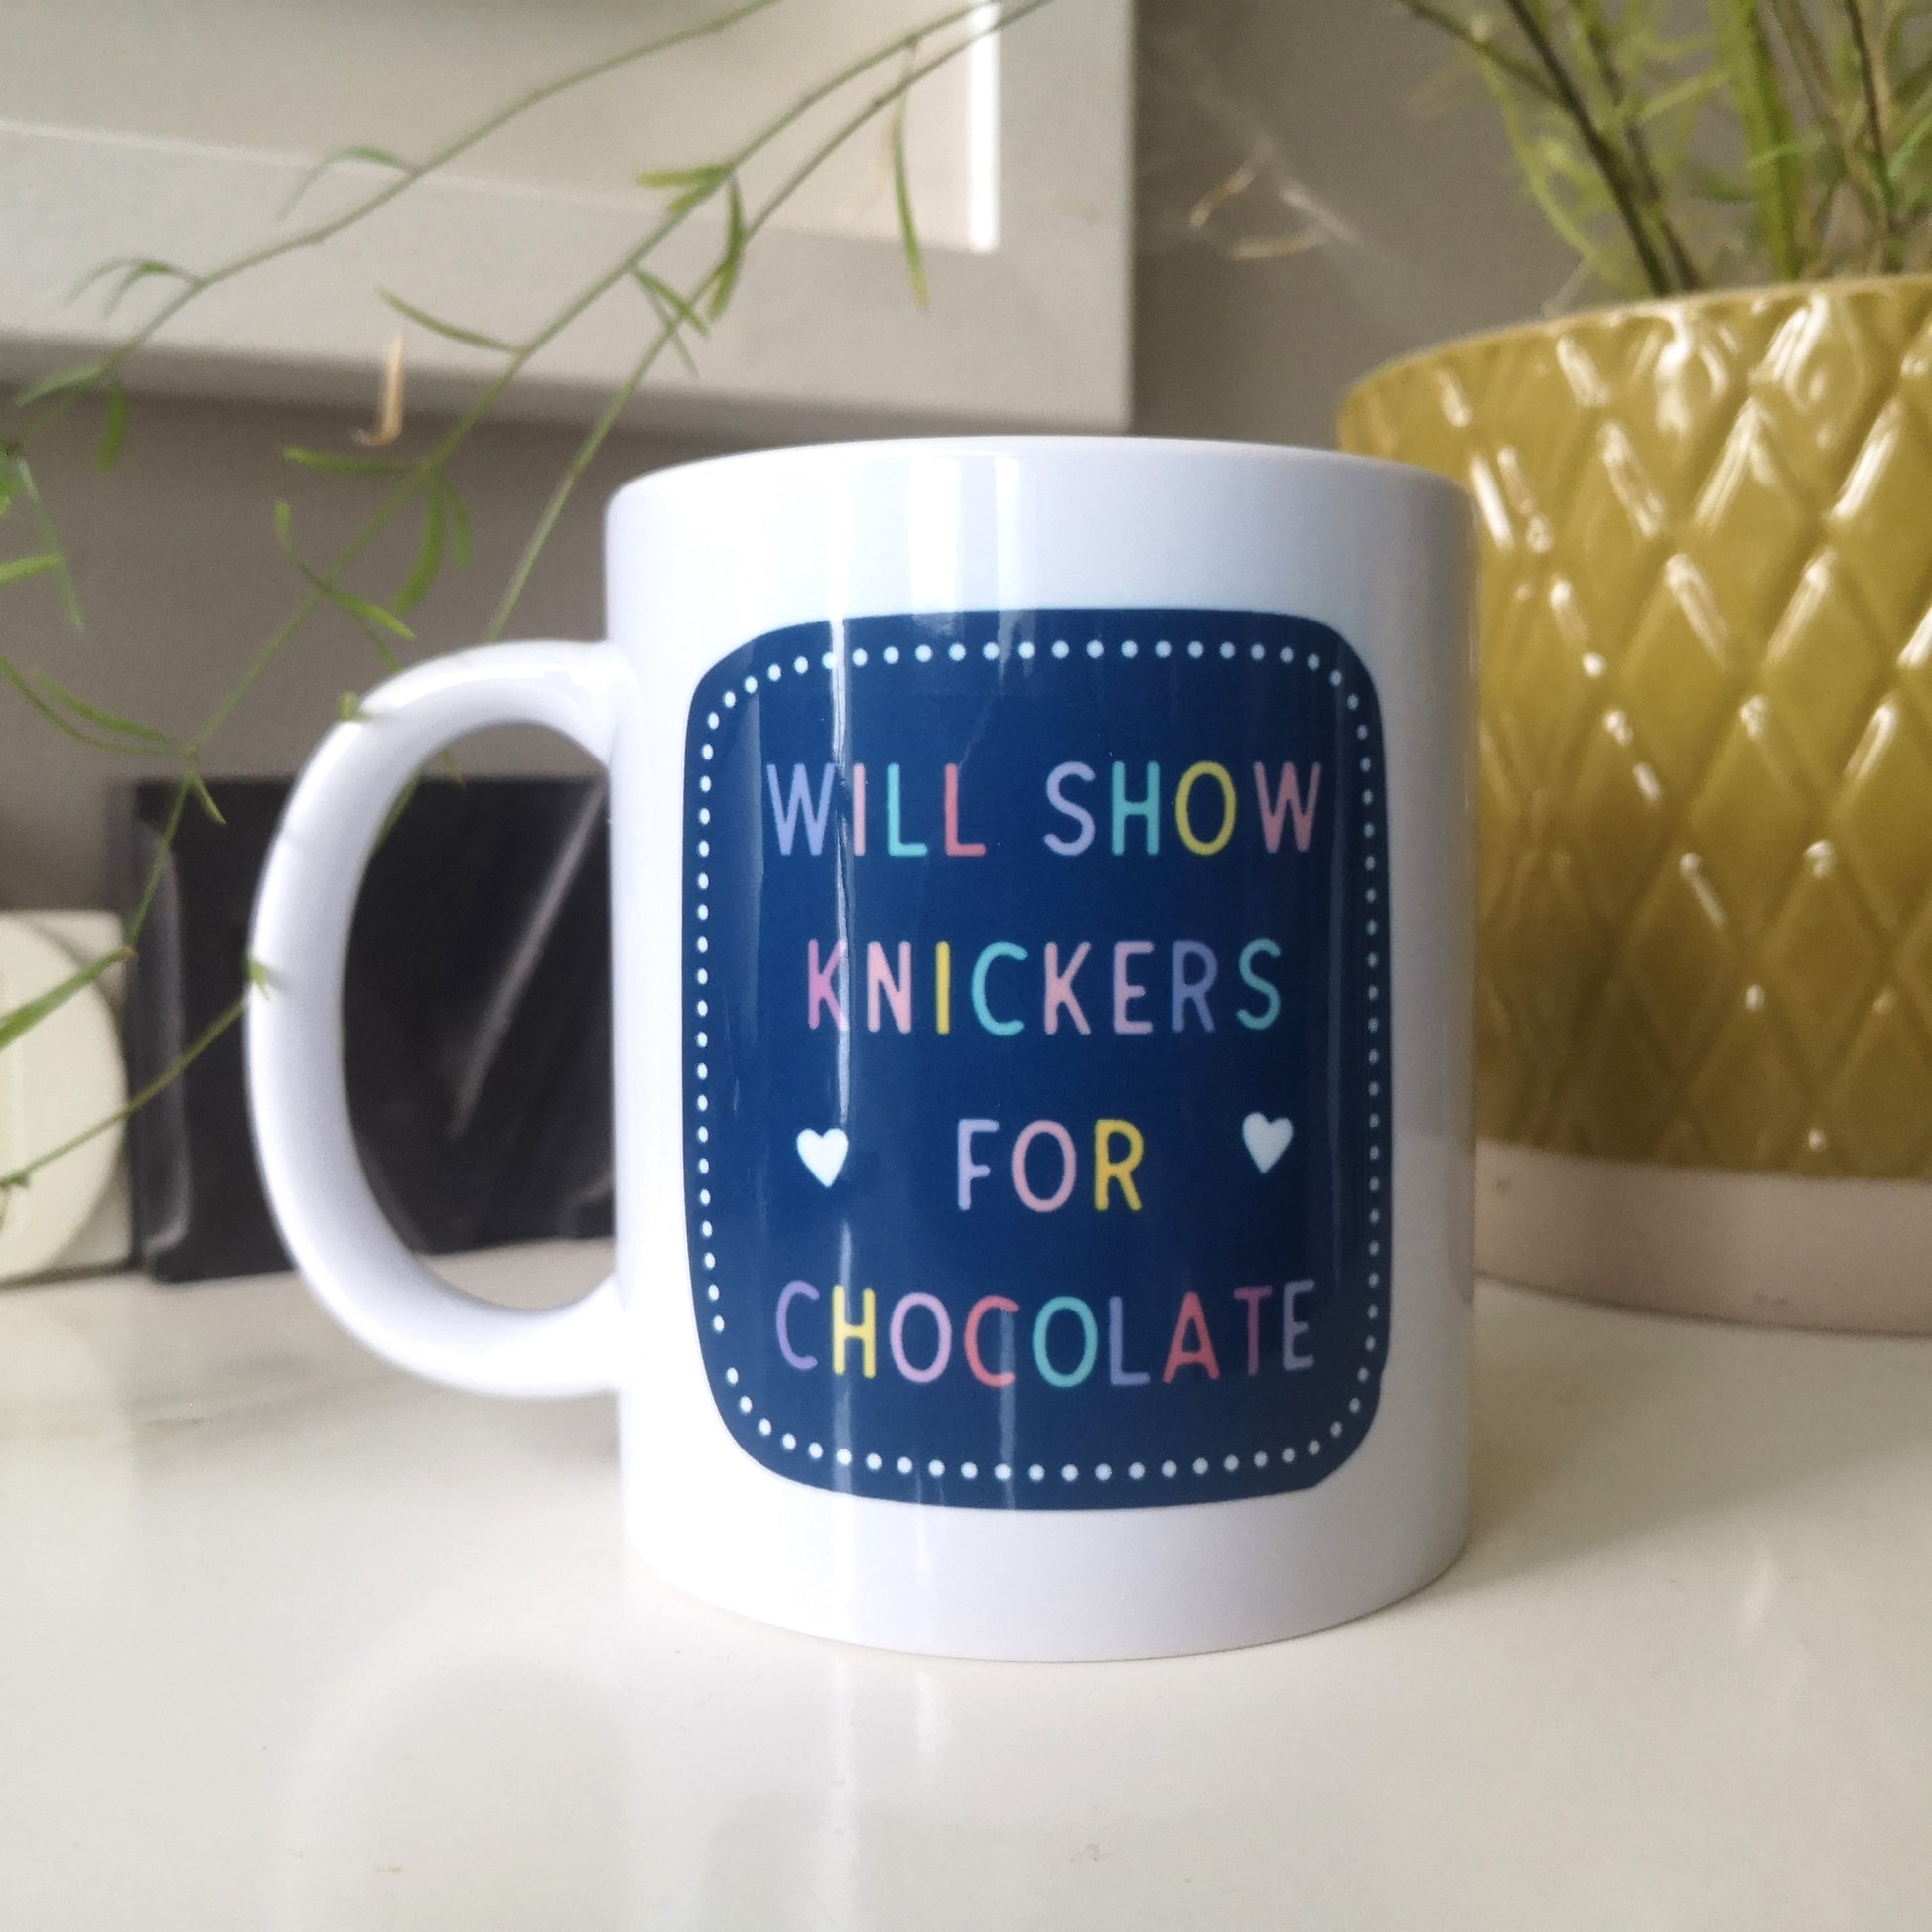 A ceramic mug with 'WILL SHOW KNICKERS FOR CHOCOLATE' in colourful writing on a dark blue background